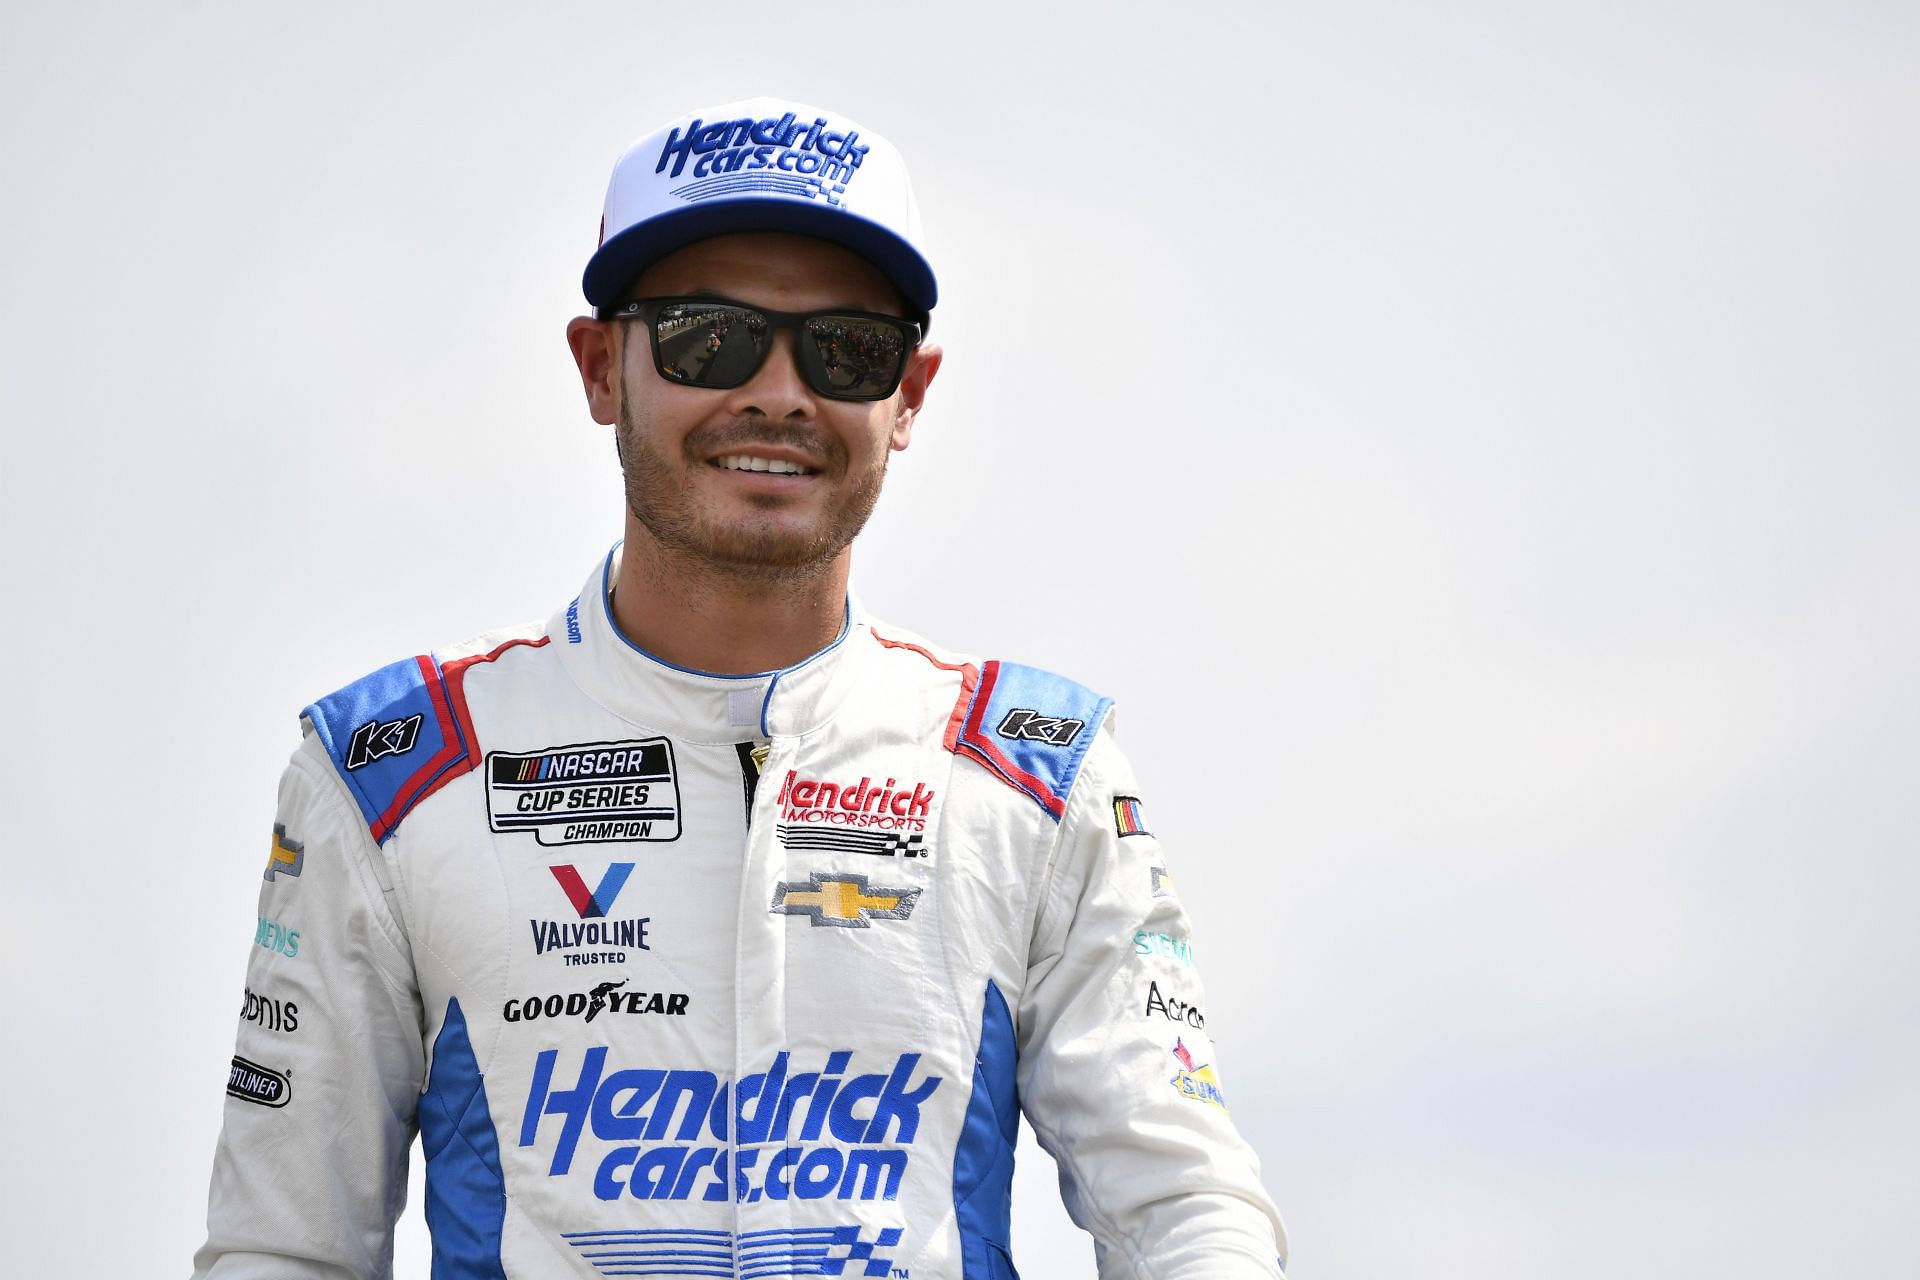 Kyle Larson walks onstage during driver intros before the NASCAR Cup Series Ally 400 at Nashville Superspeedway